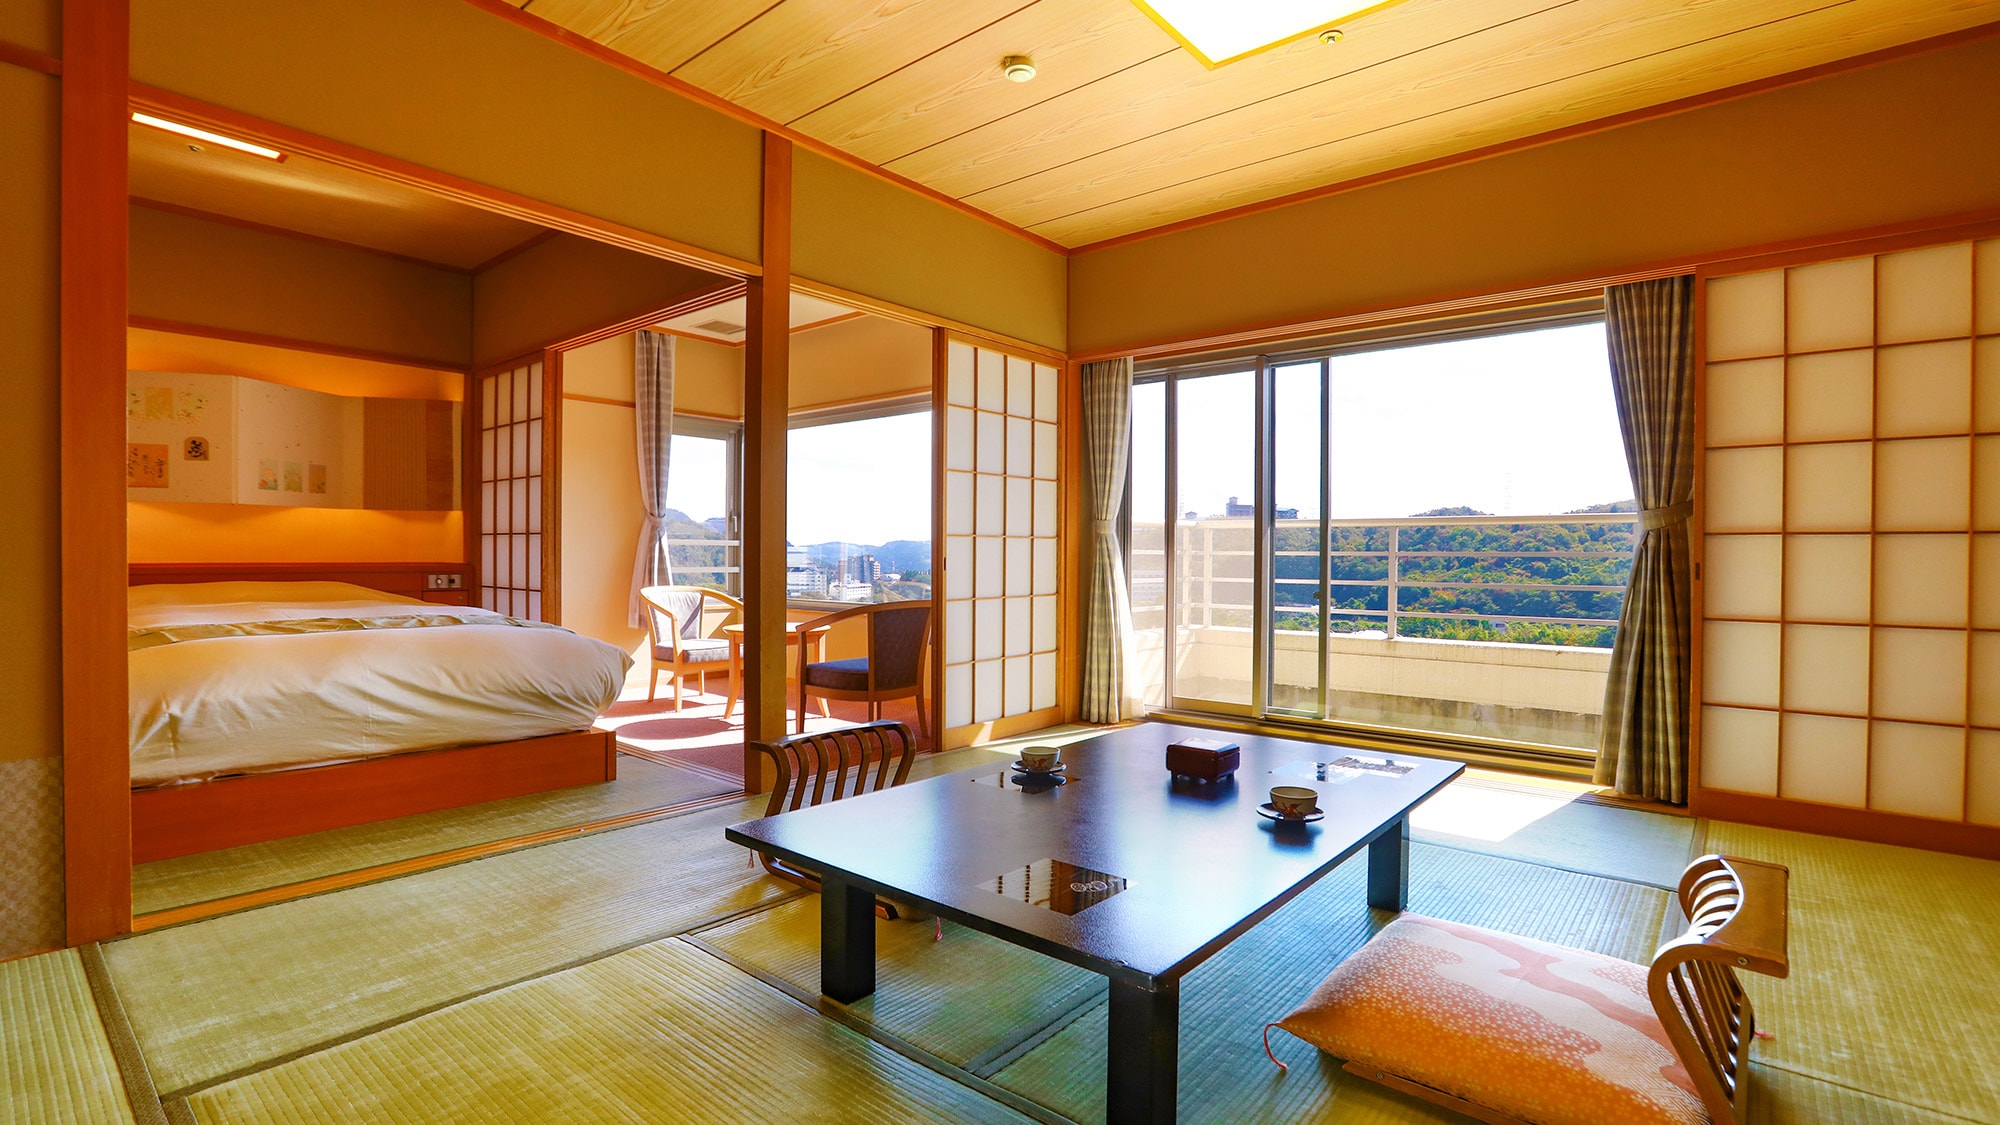 [Non-smoking] Japanese-style room 10 tatami mats + 4.5 tatami mats + 1 semi-double (example) & hellip; 1 room closest to the elevator on the 8th to 11th floors